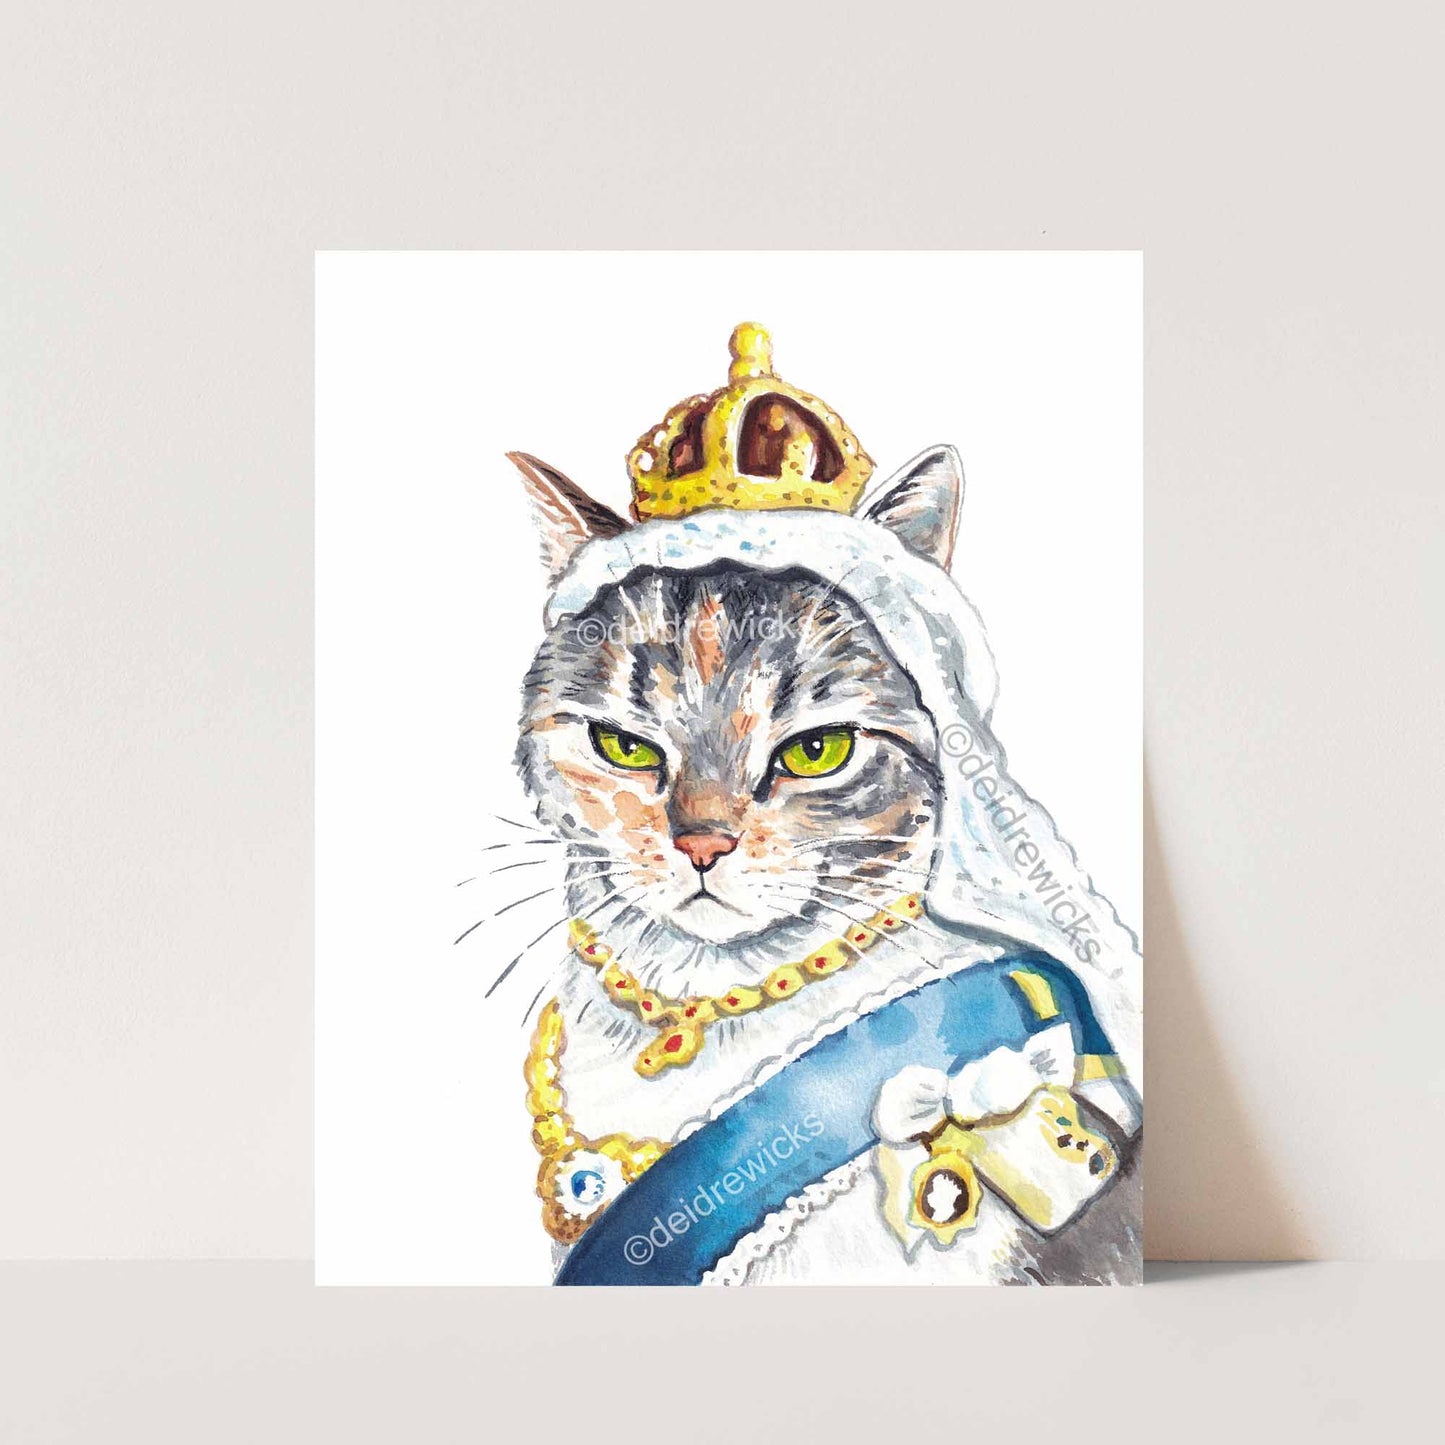 Queen Victoria as a calico cat watercolor painting by Deidre Wicks